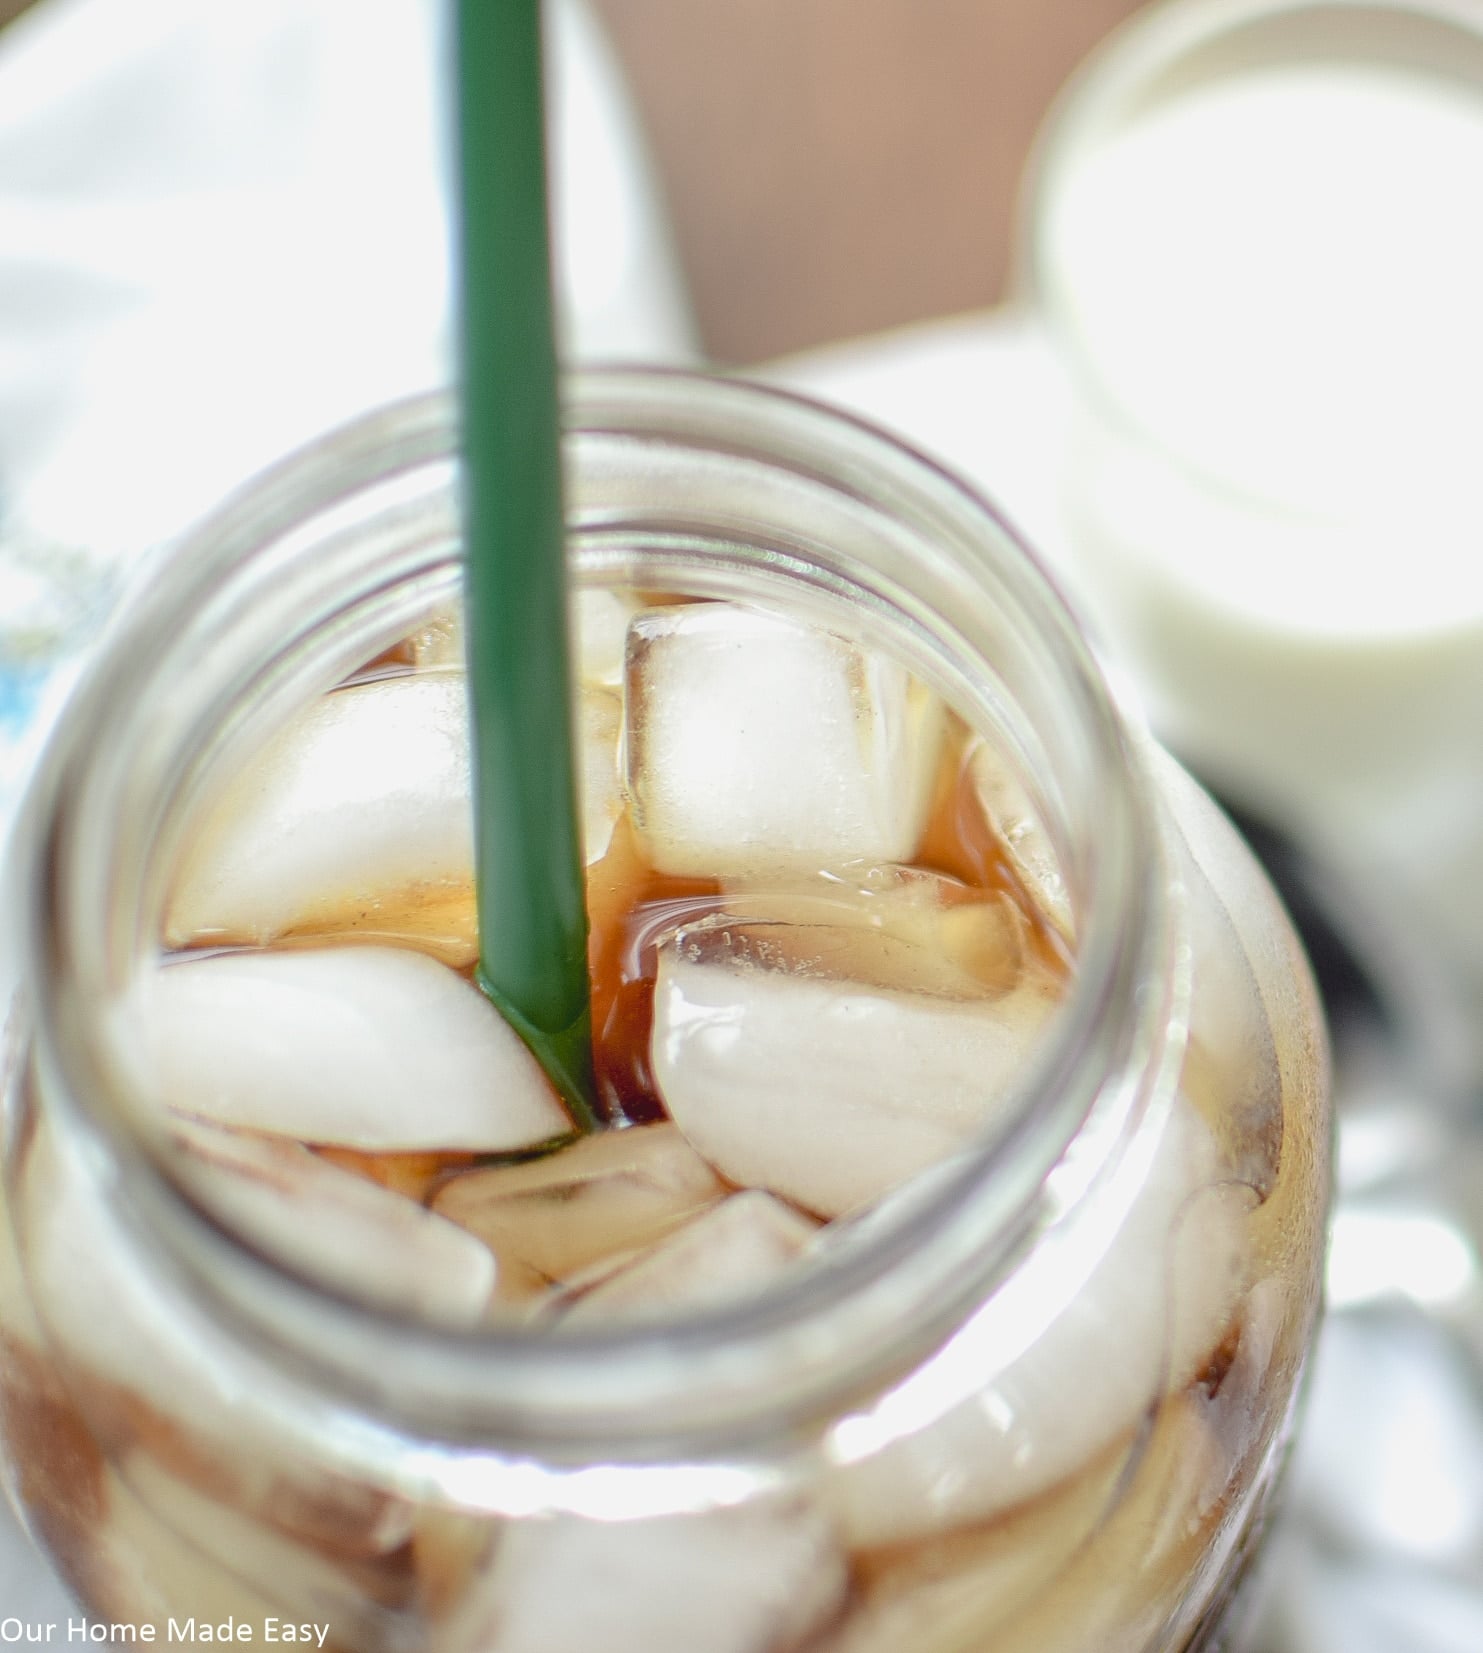 How to Make Iced Coffee at Home - Pact Coffee's Recipe